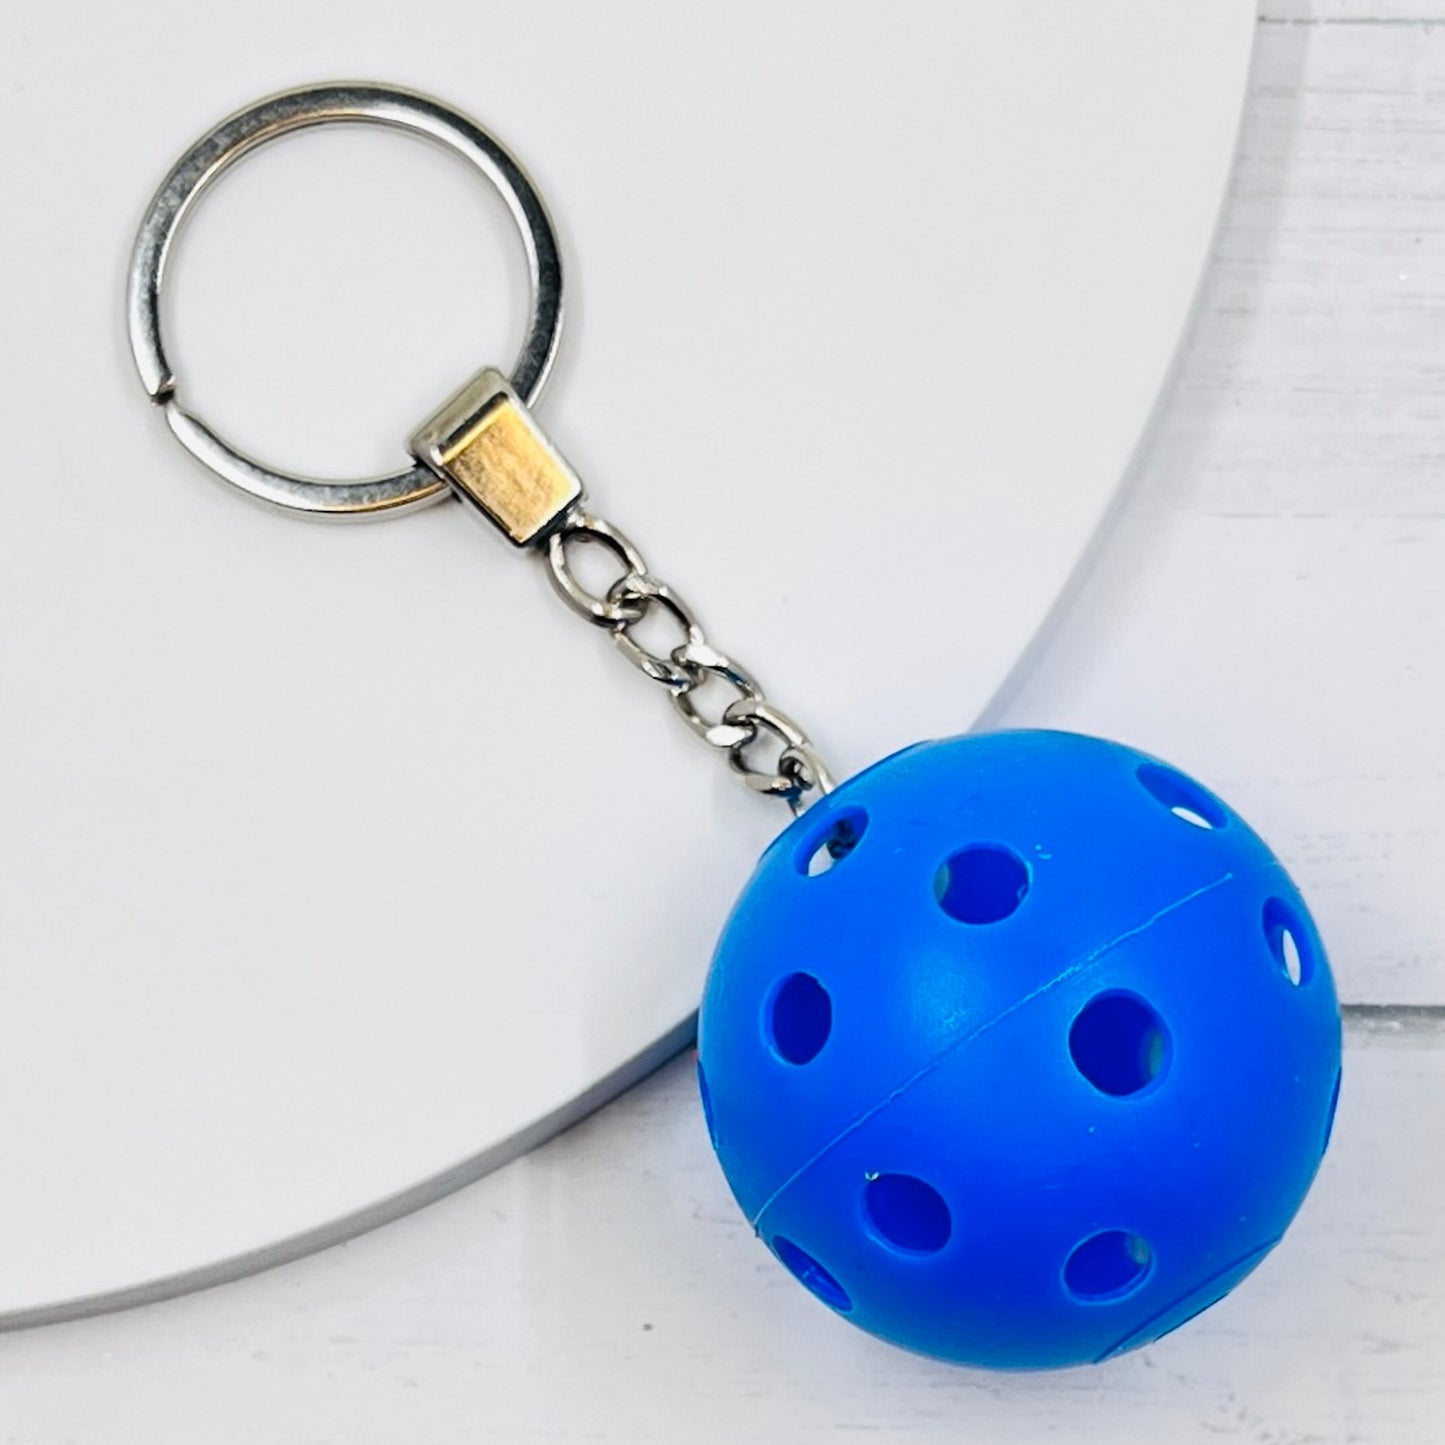 Heavy Duty Mini Pickleball Bag Tags/Pulls  Each order gets you 1 of the cutest pickleball and heavy duty chains! The Mini pickleballs measure about 1 1/2 inches and are used as bag tag markers. Fun for any bag, especially your pickleball bag!! The balls come in 7 colors: Red, Green, Blue, White, Pink, Orange, and Yellow. Choose from 7 fun colors.